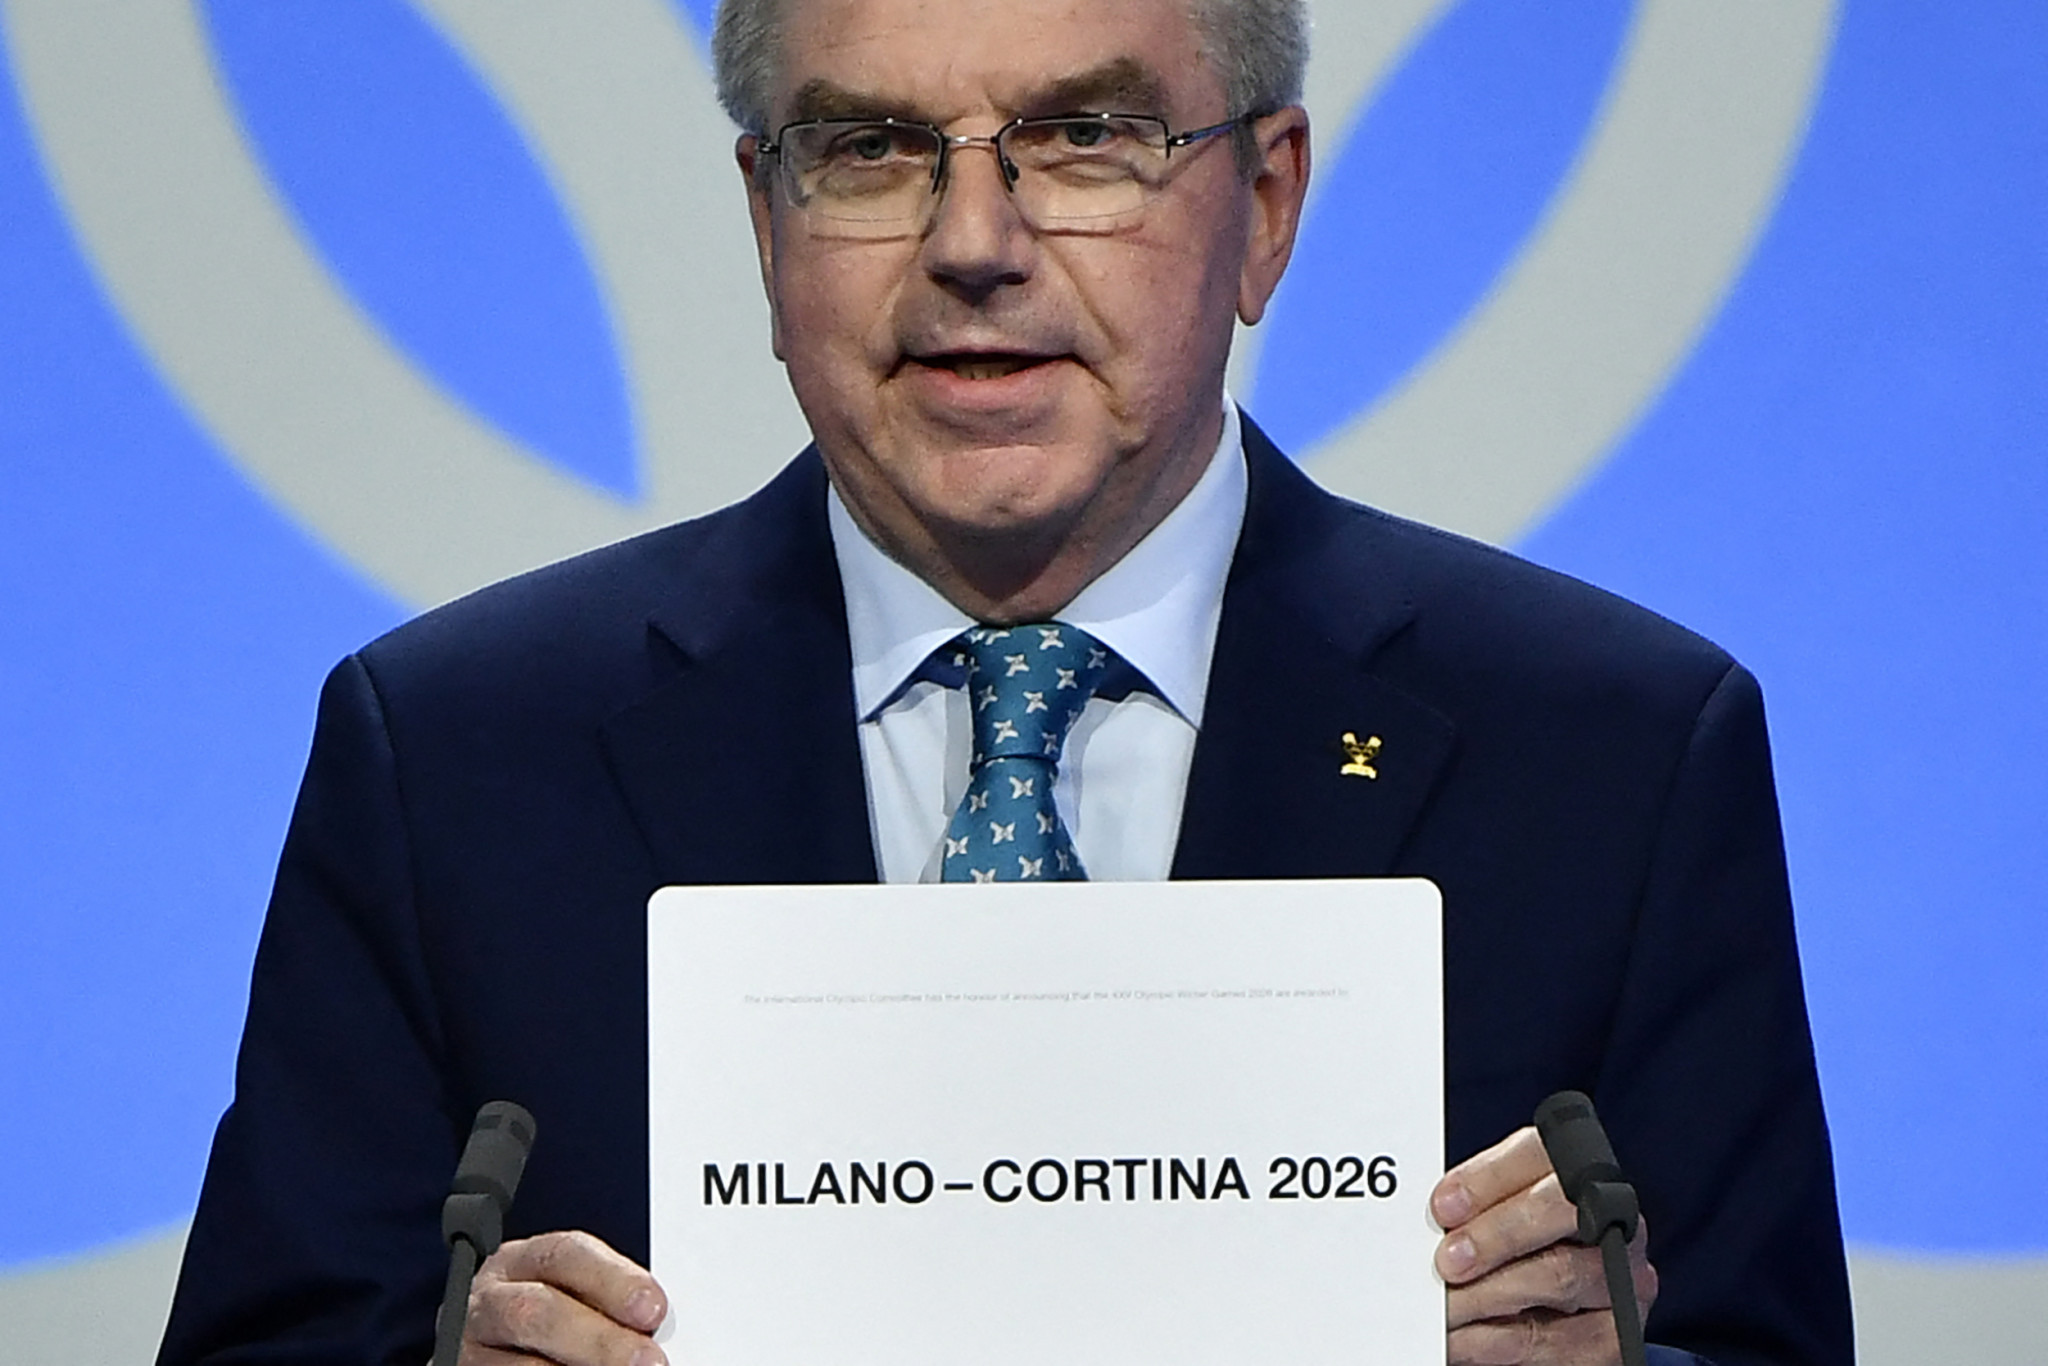 Events at Milan Cortina 2026 will be spread out across a large area of northern Italy ©Getty Images